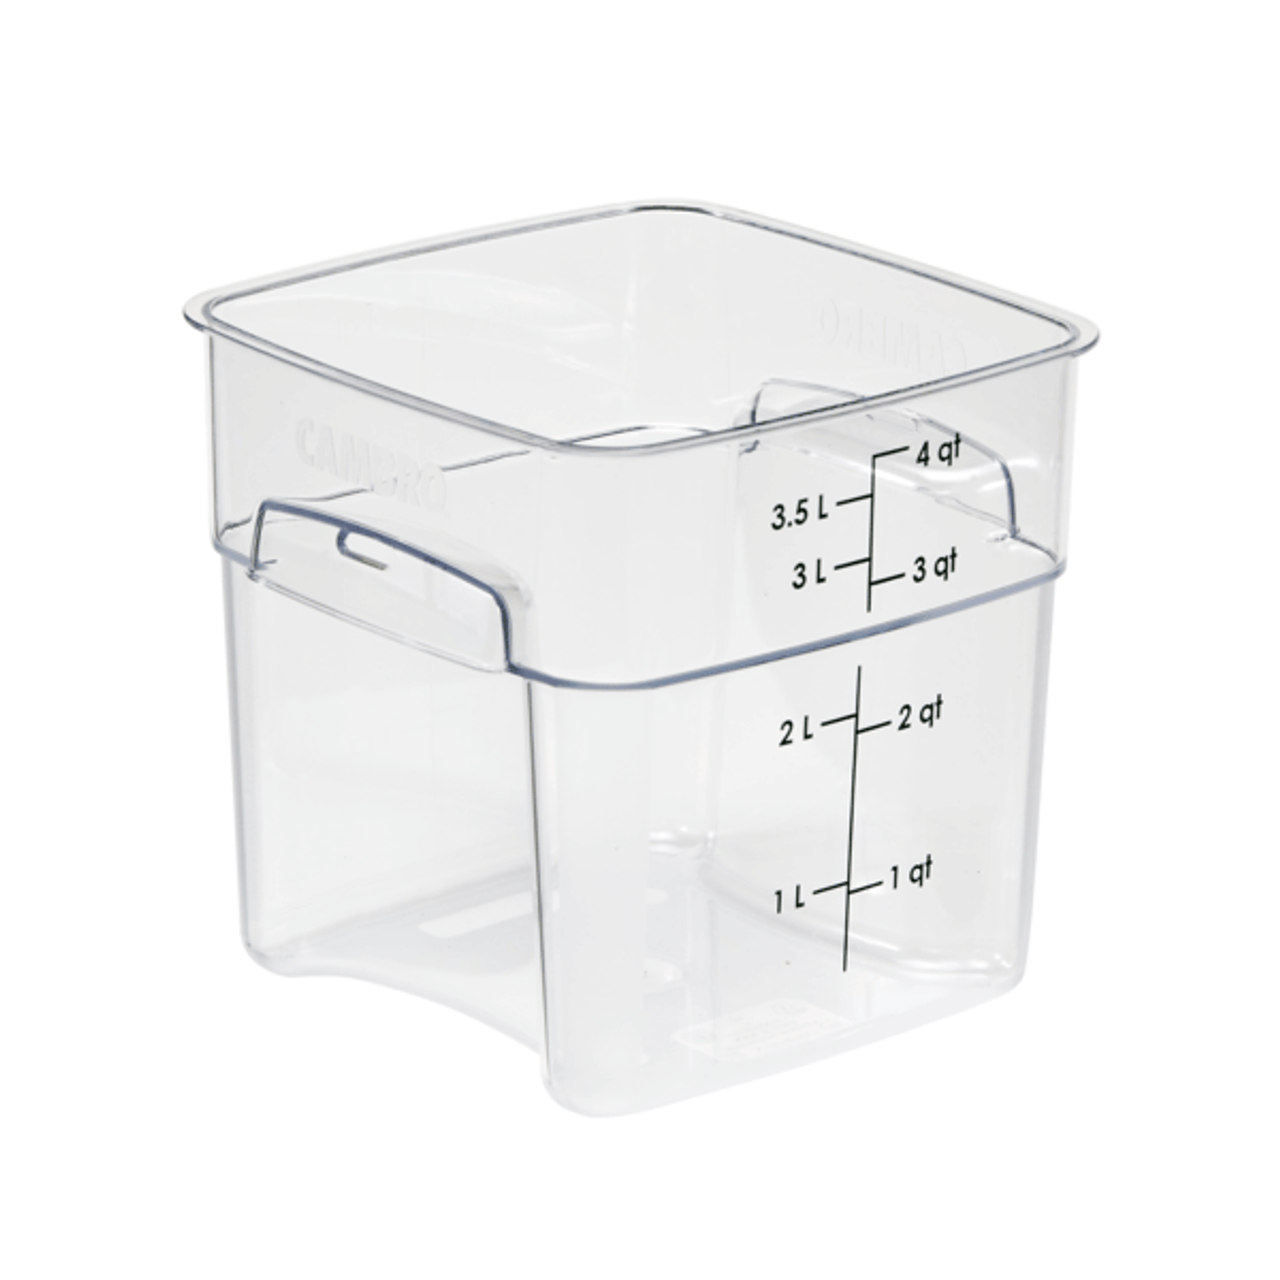 https://cdn11.bigcommerce.com/s-g3i86bef61/images/stencil/1280x1280/products/4504/4693/Cambro-4SFSPROCW135-FreshPro-4qt__12619.1680727686.png?c=1